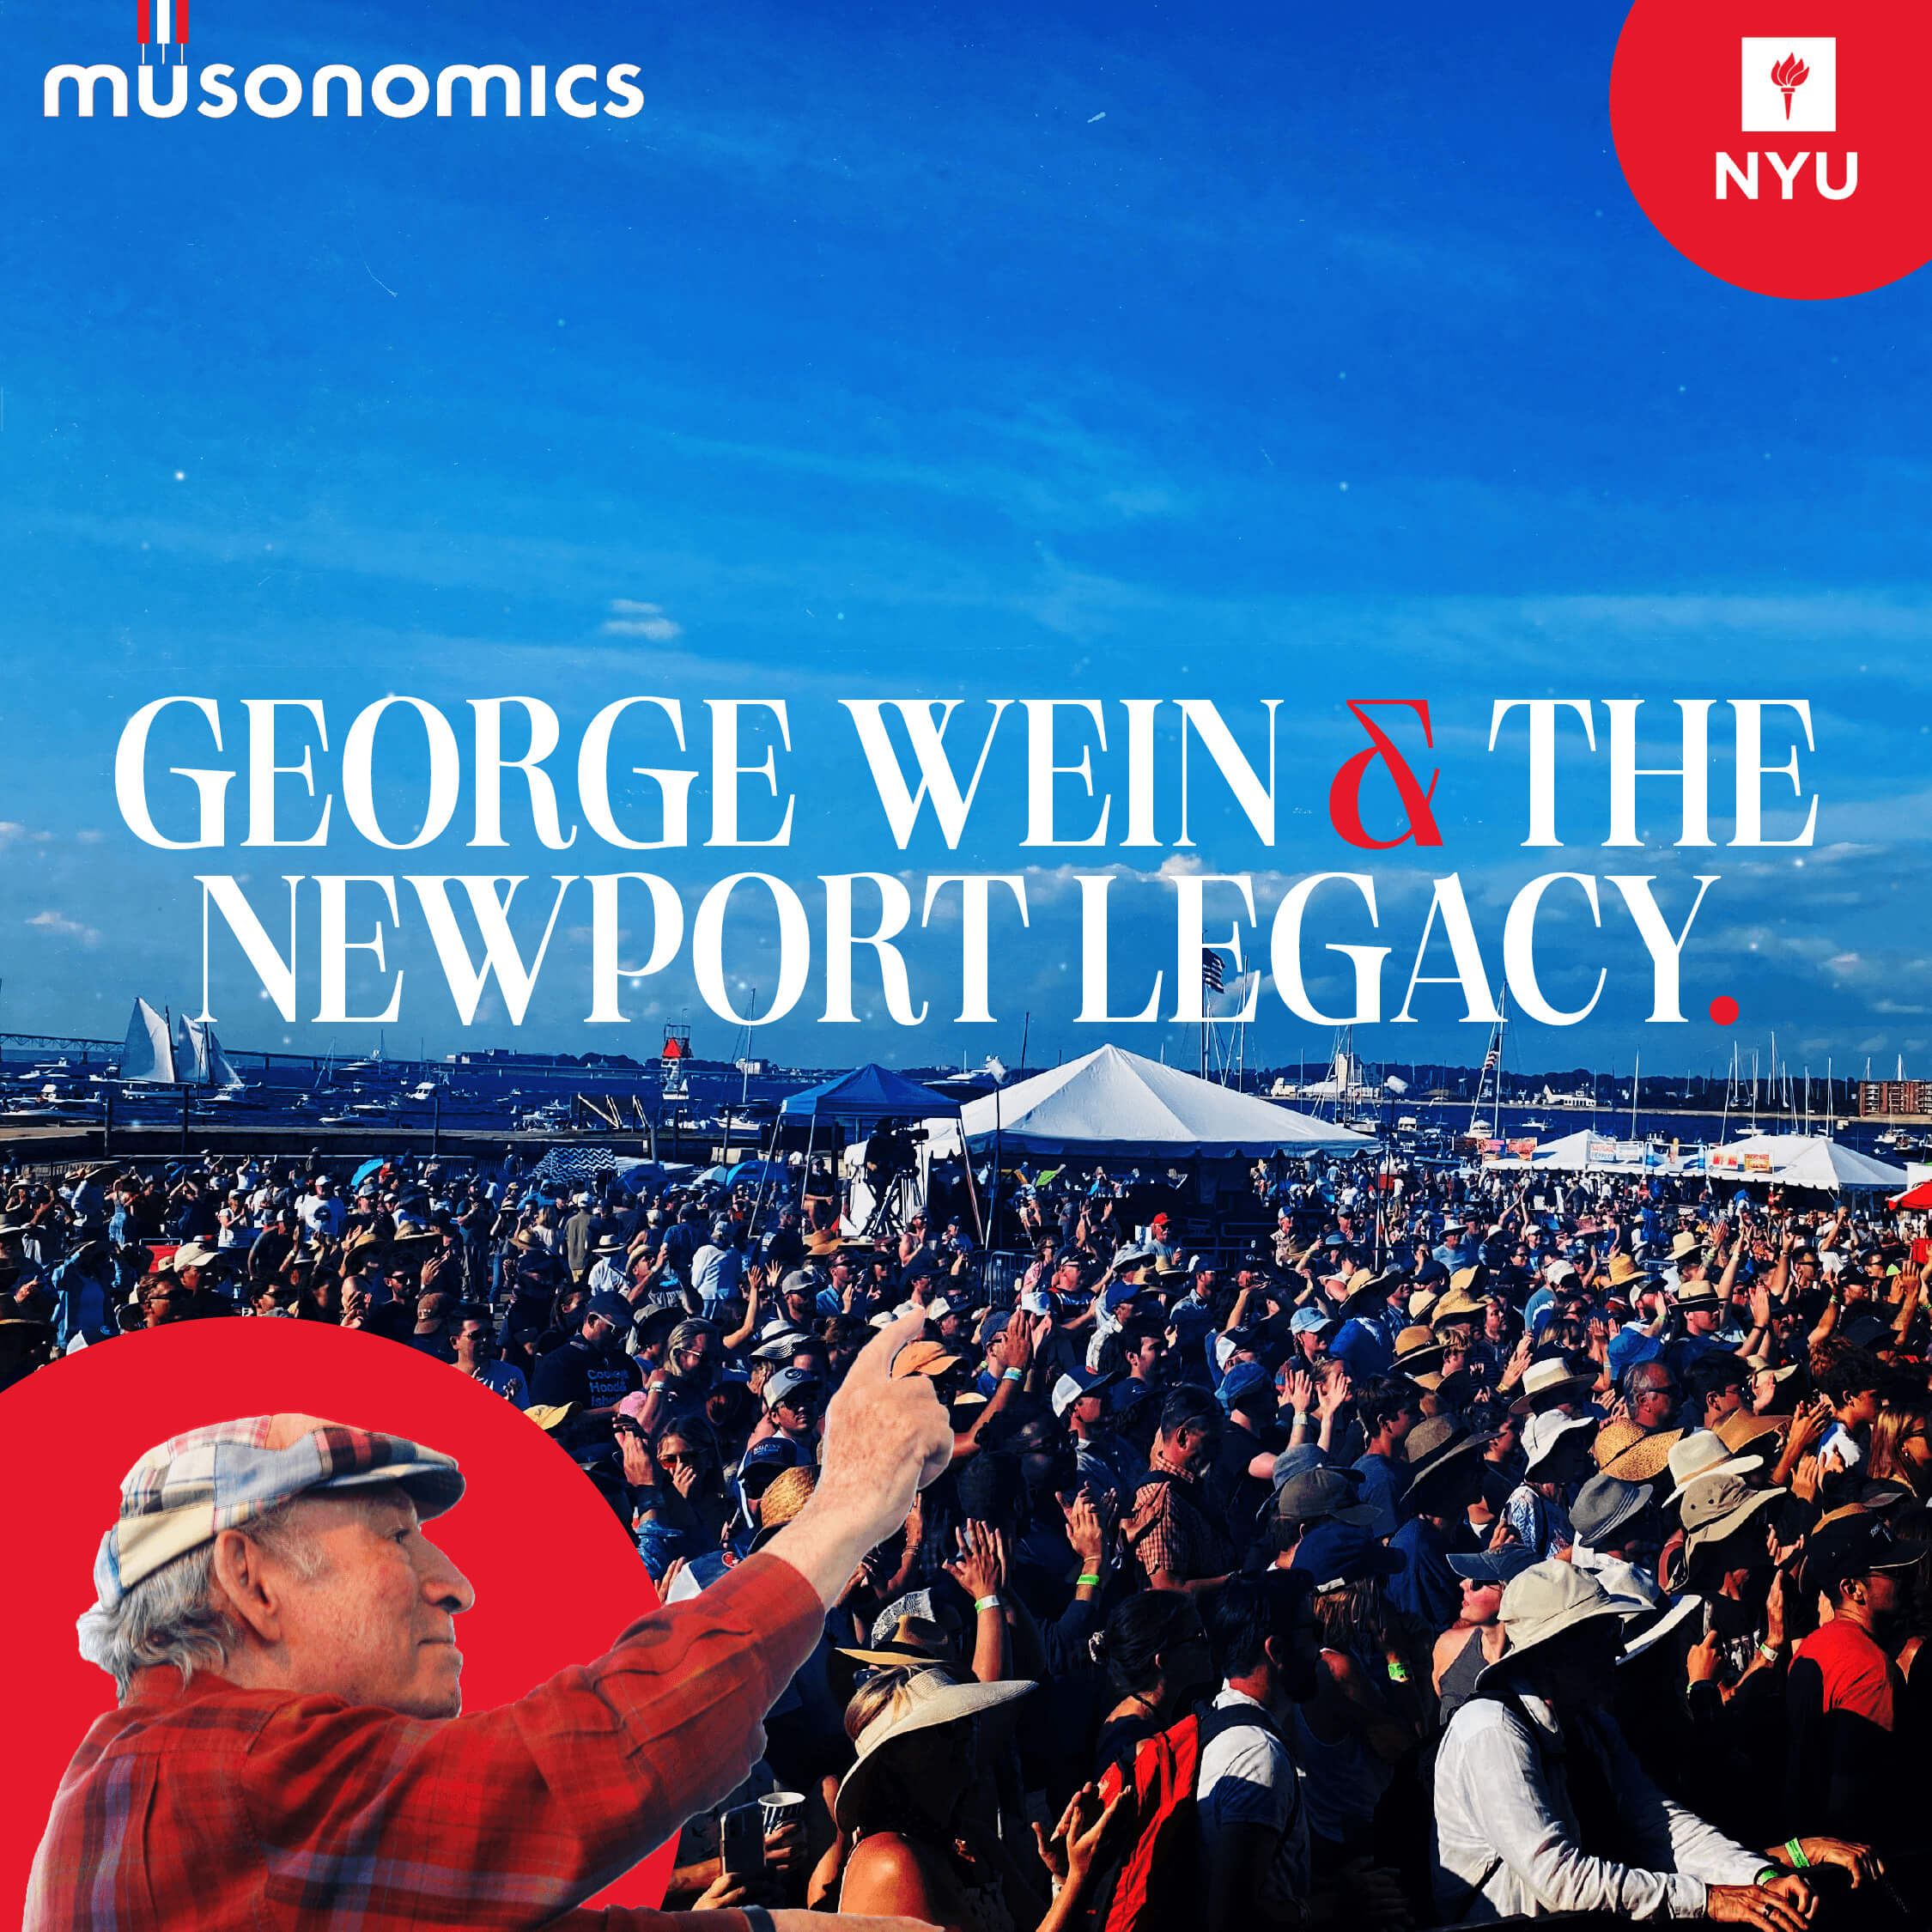 George Wein and the Newport Legacy